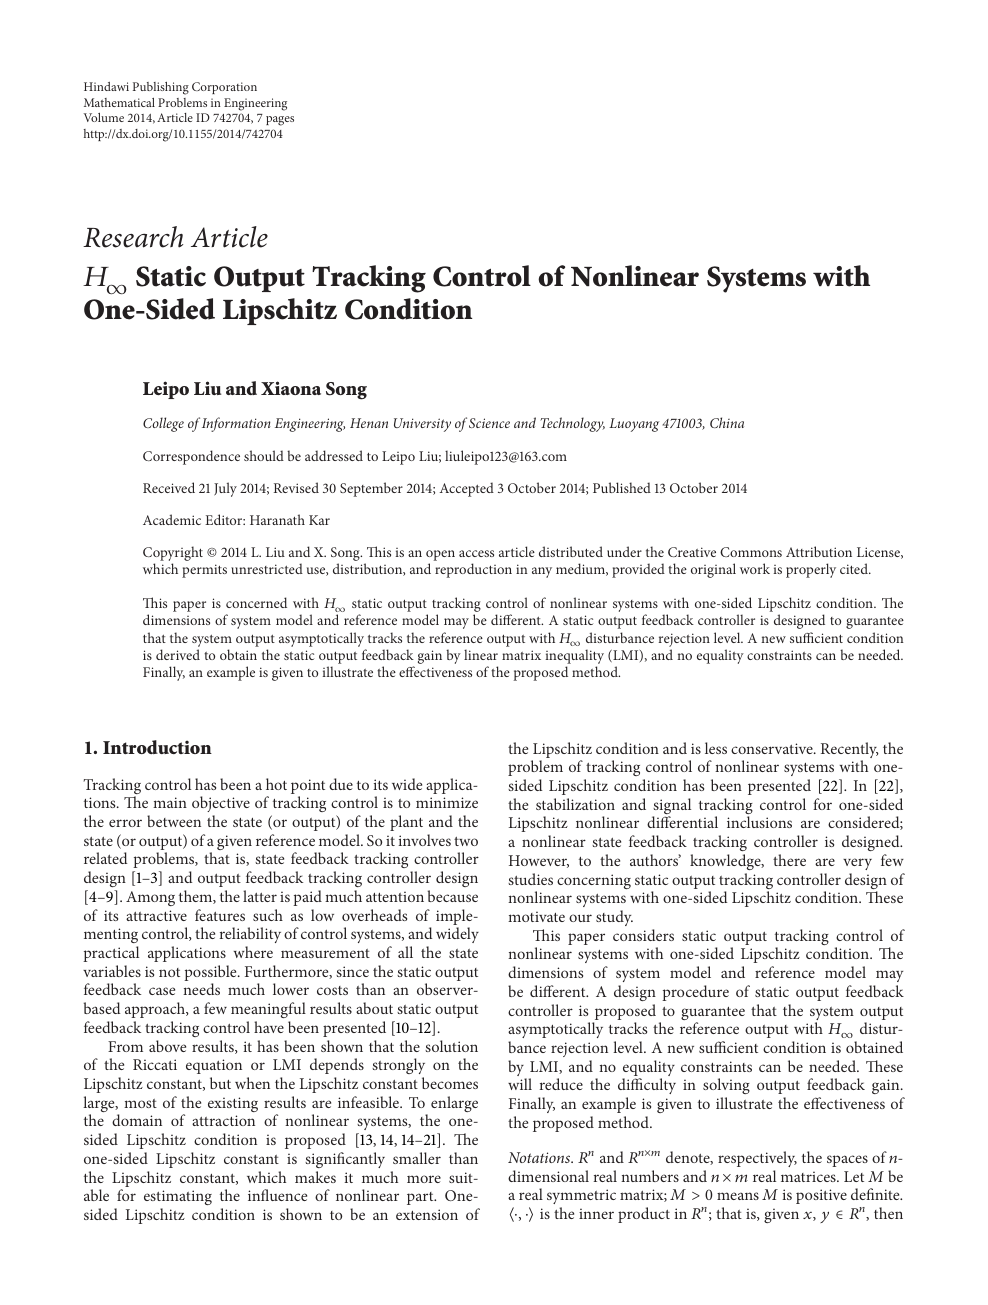 H Static Output Tracking Control Of Nonlinear Systems With One Sided Lipschitz Condition Topic Of Research Paper In Mathematics Download Scholarly Article Pdf And Read For Free On Cyberleninka Open Science